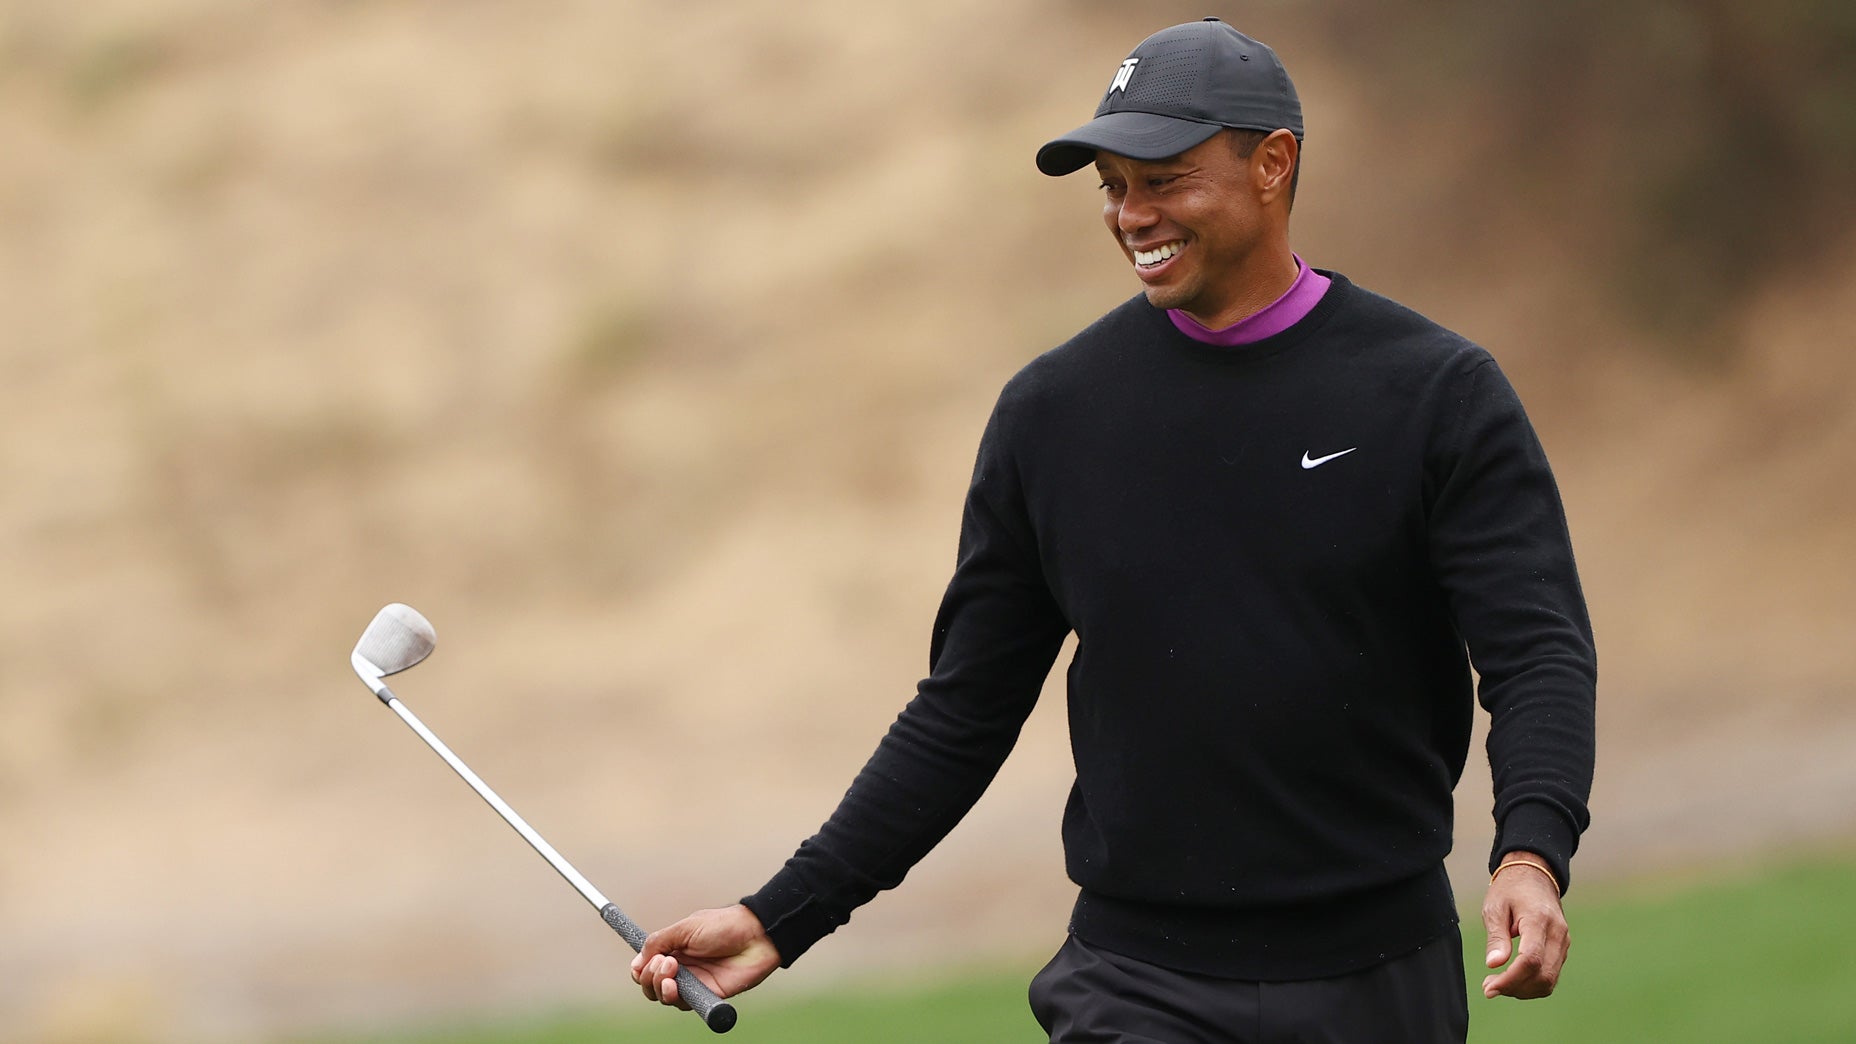 Tiger Woods shoots his best round of the year at the Zozo Championship